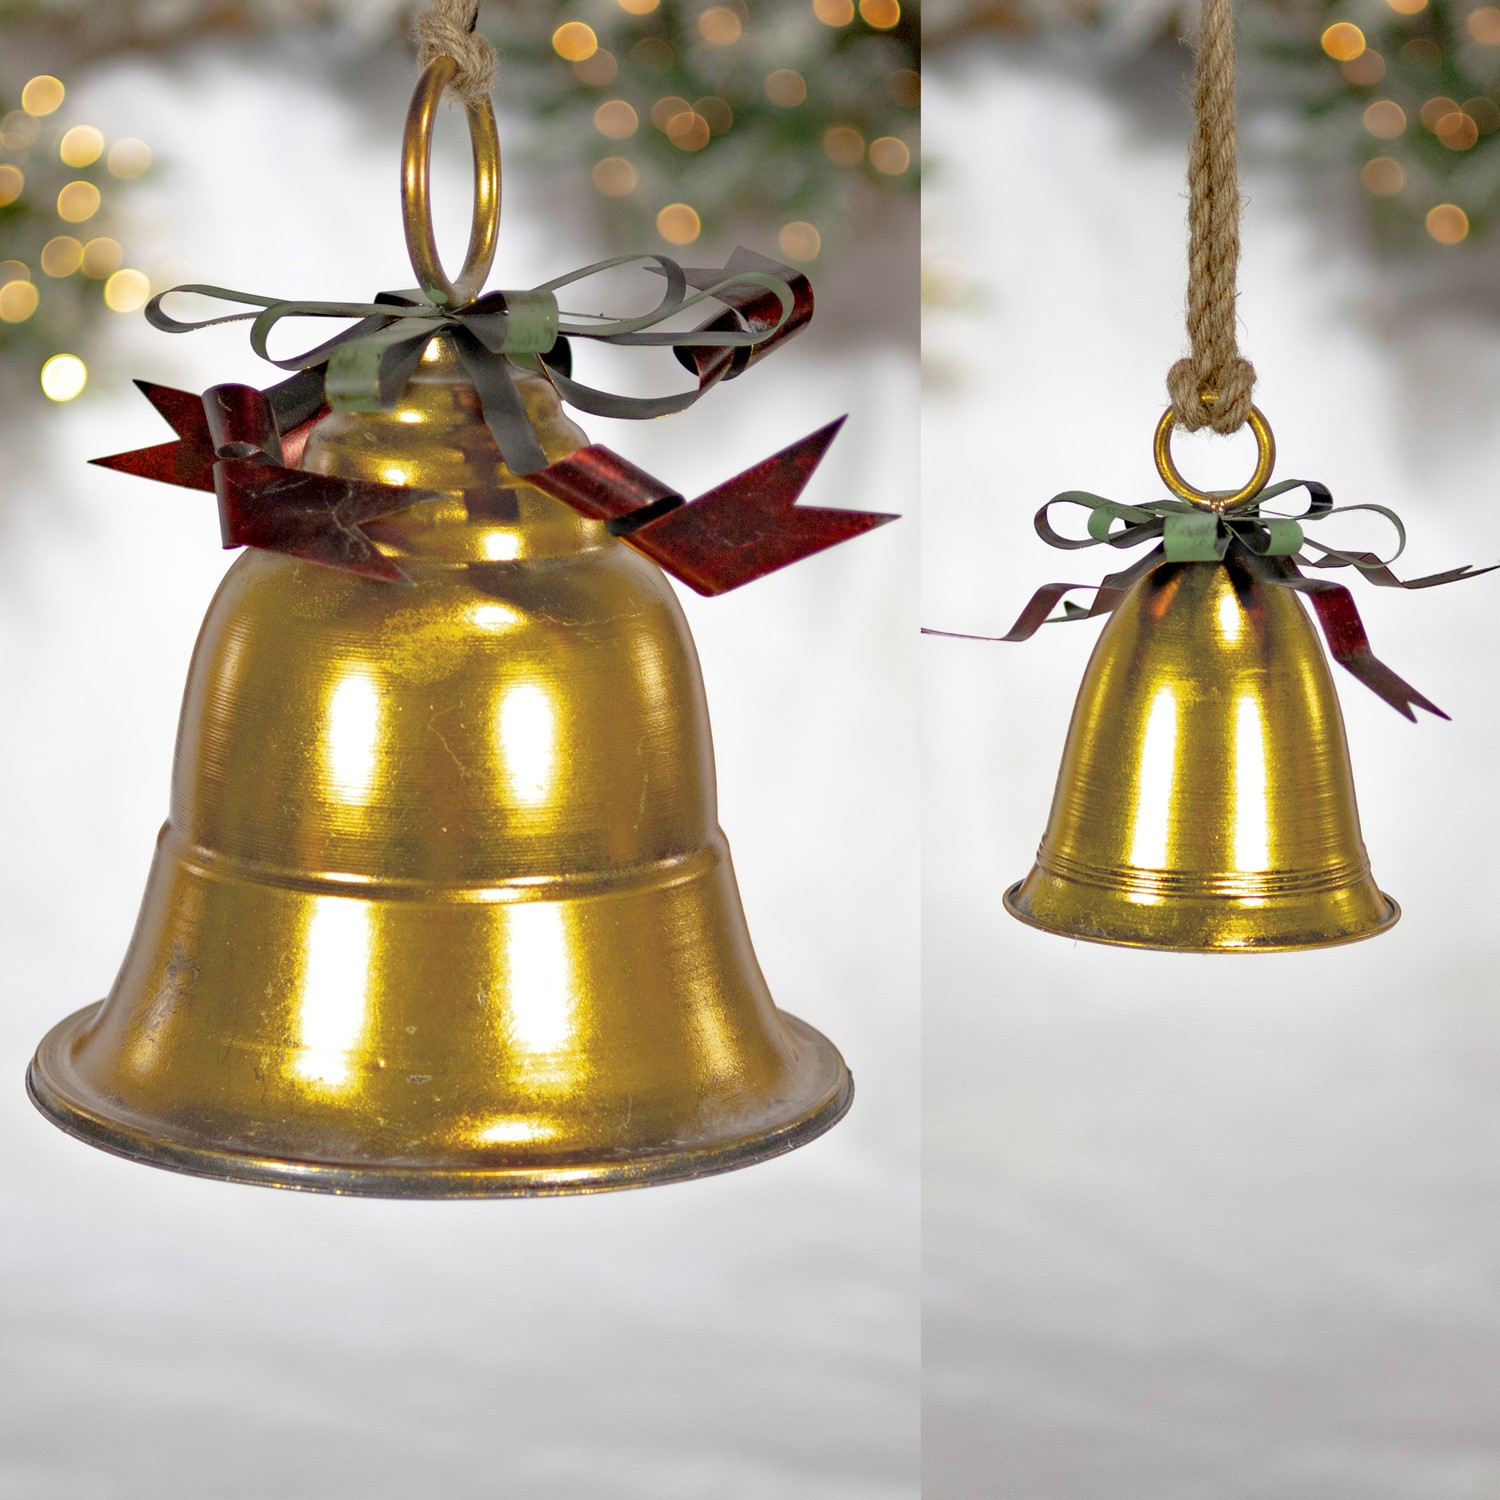 Set of 3 Gold Tone Metal Bells 1.5 Inches